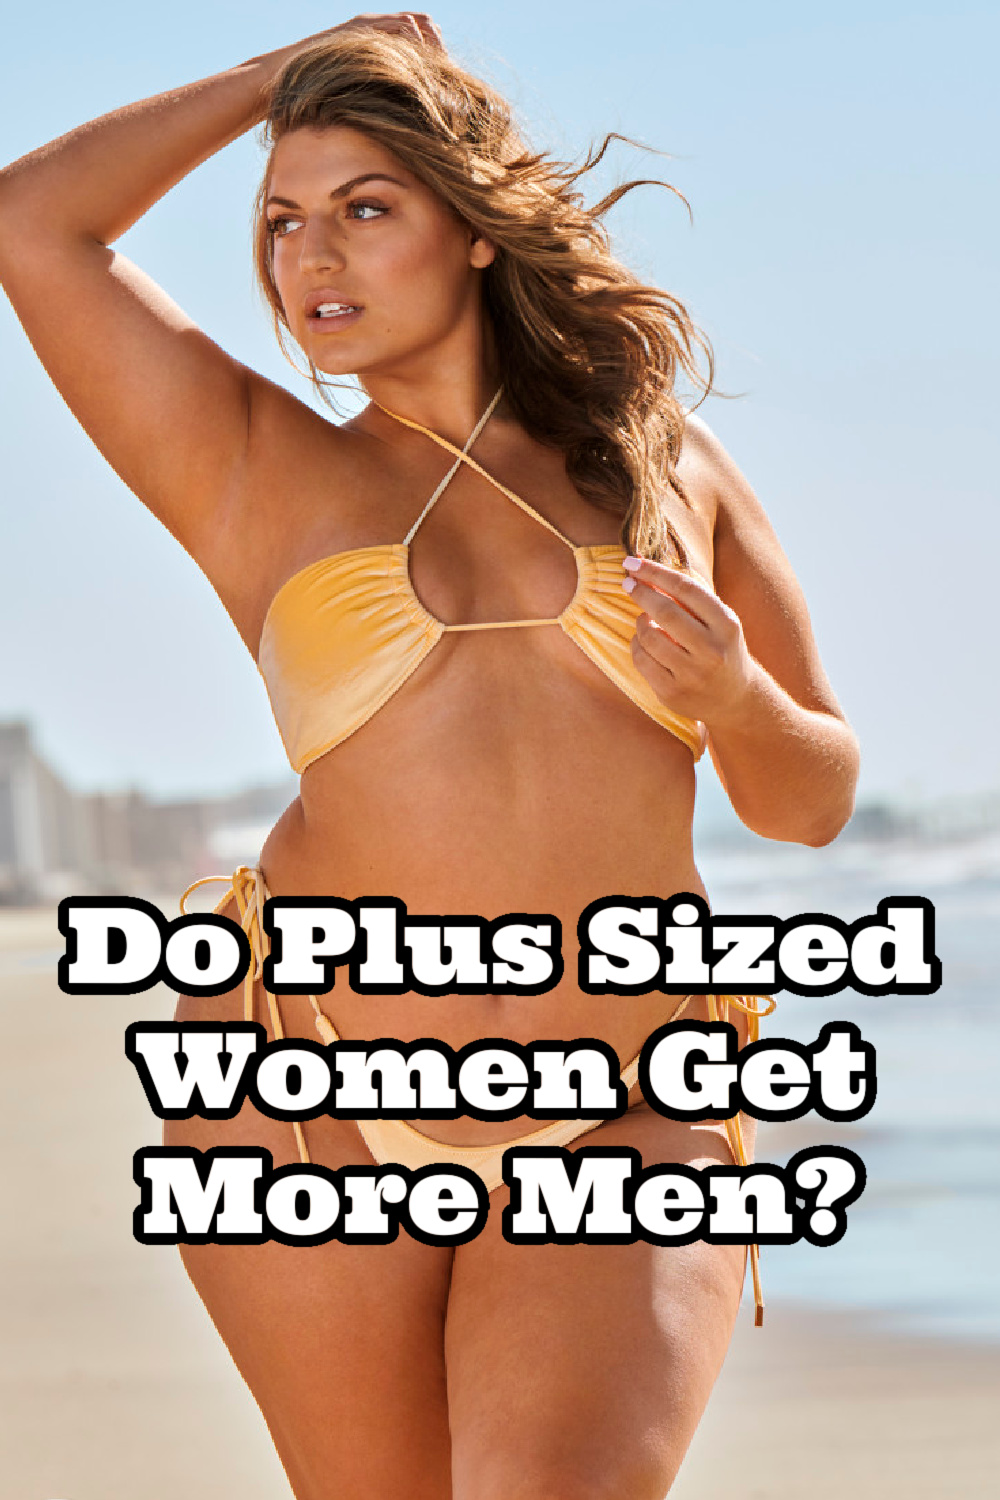 Be Plus/Curvy - For the ladies with the more